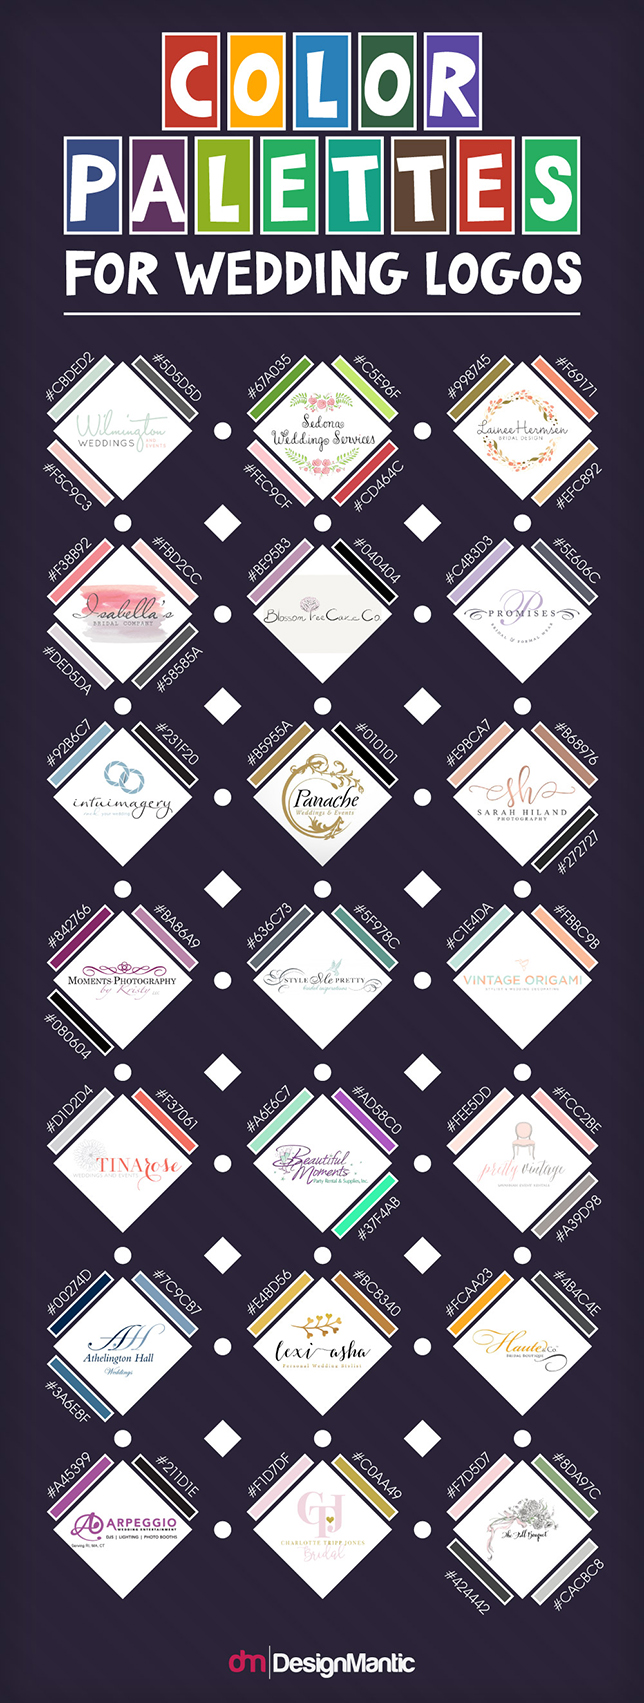 Color palettes for wedding logo infographic